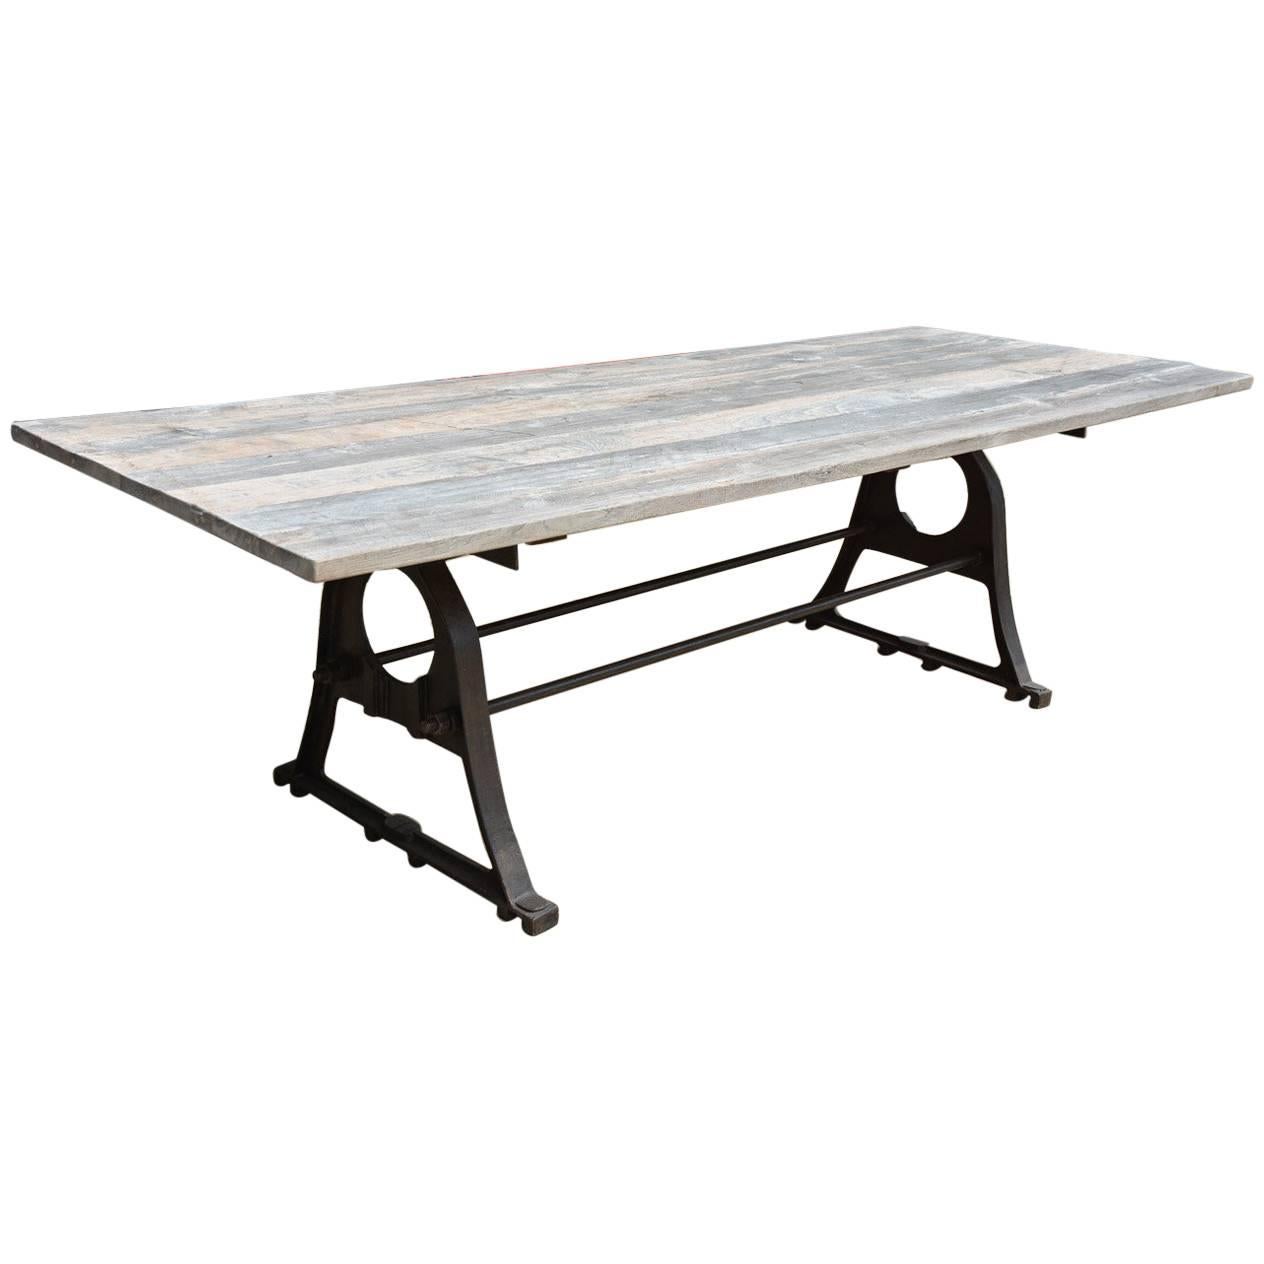 Renaissance Style Metal Dining Table